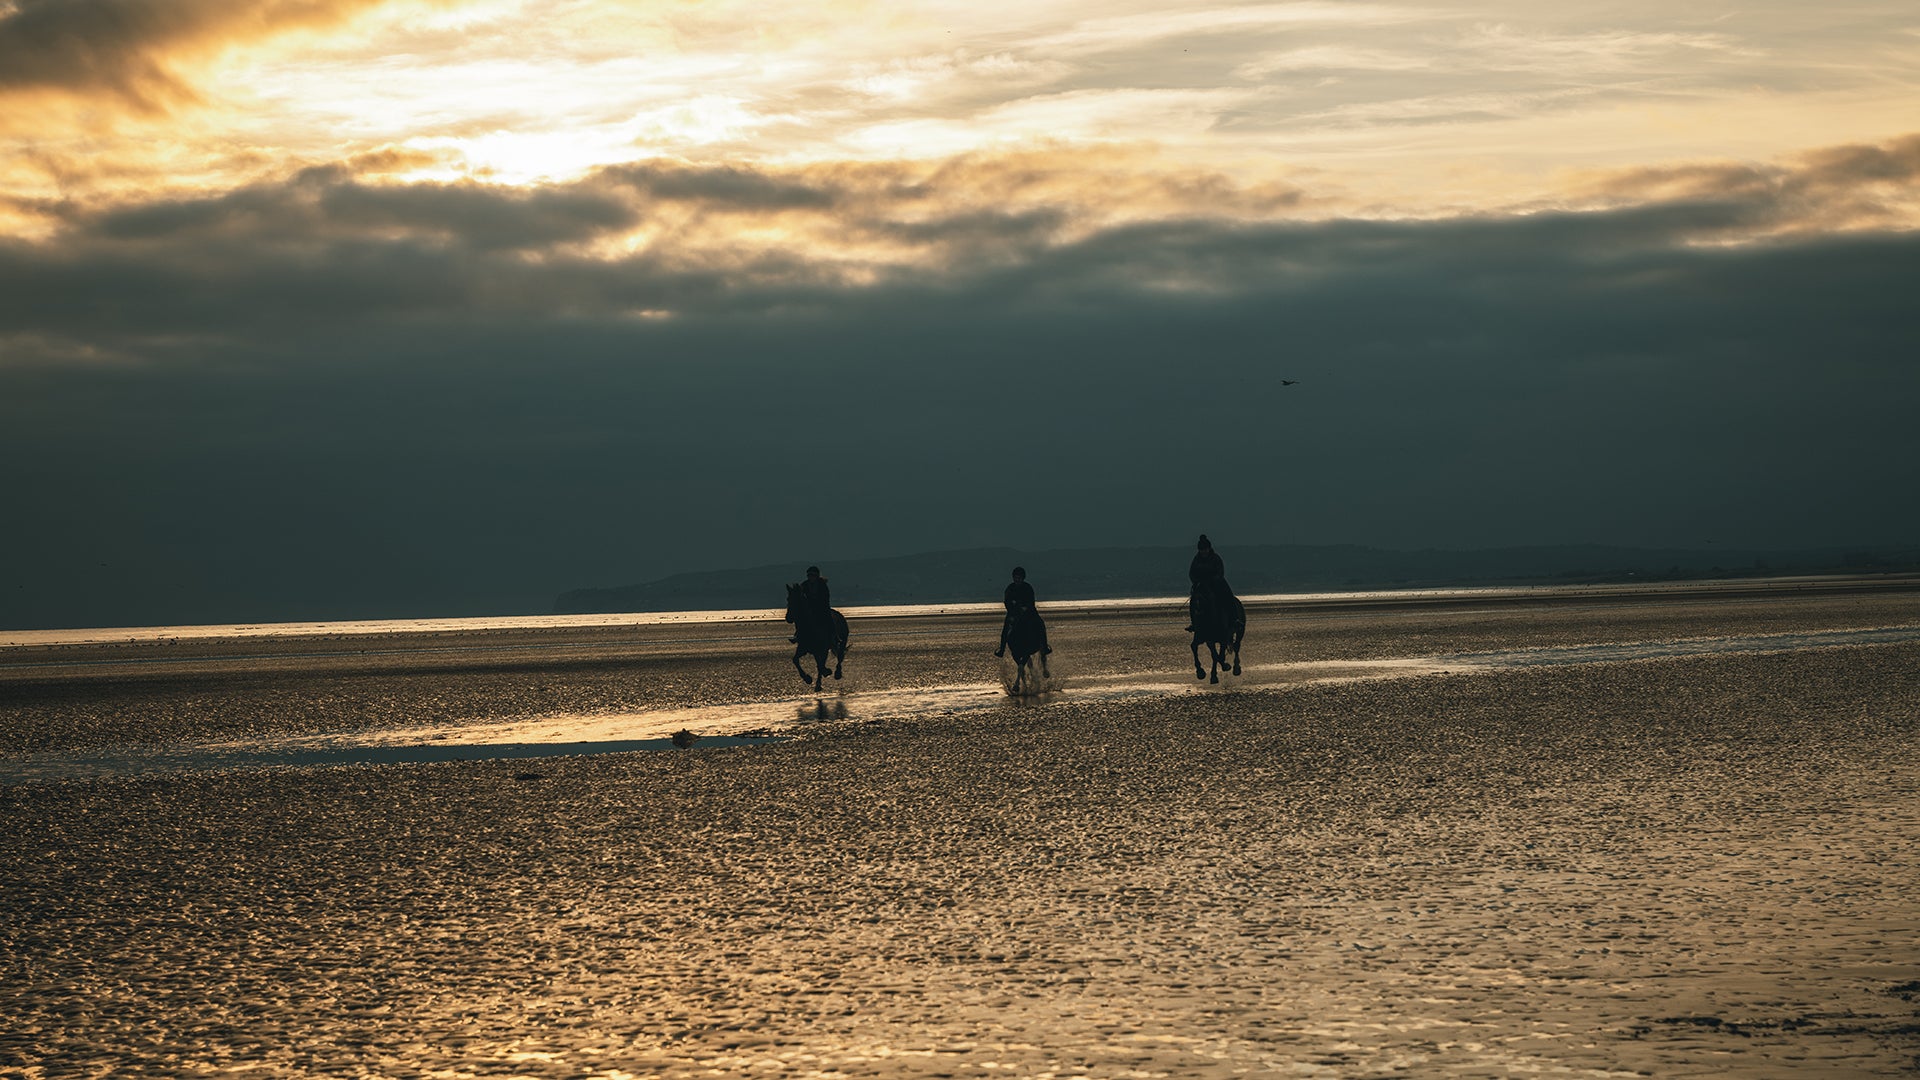 Photography With Gearing - Horses On The Beach